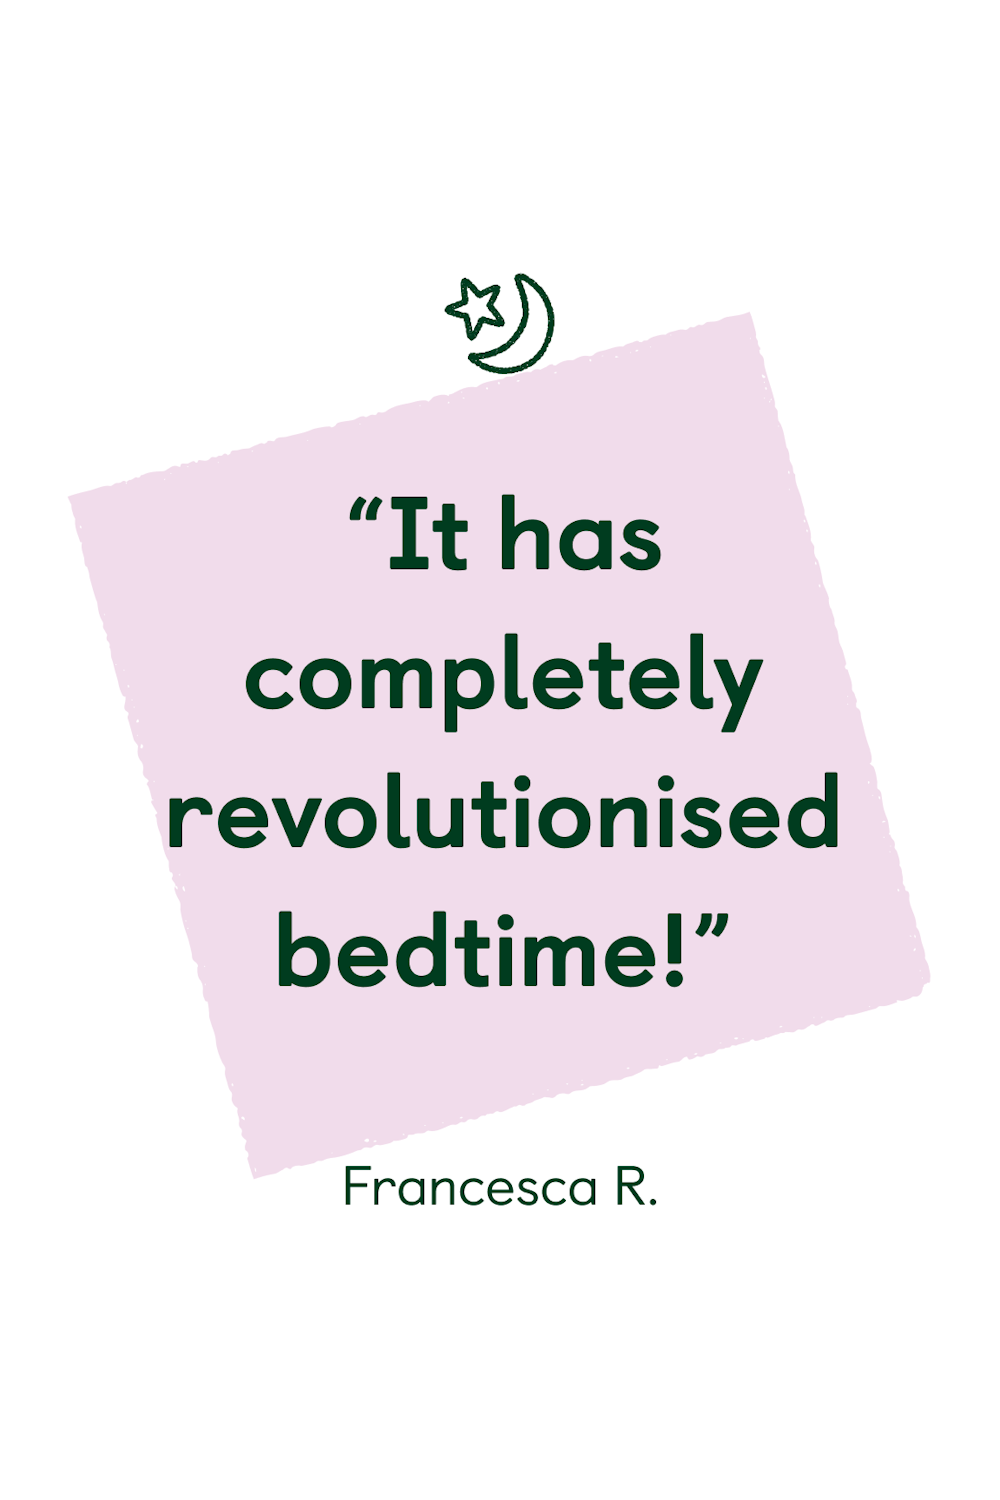 "It has completely revolutionised bedtime!”